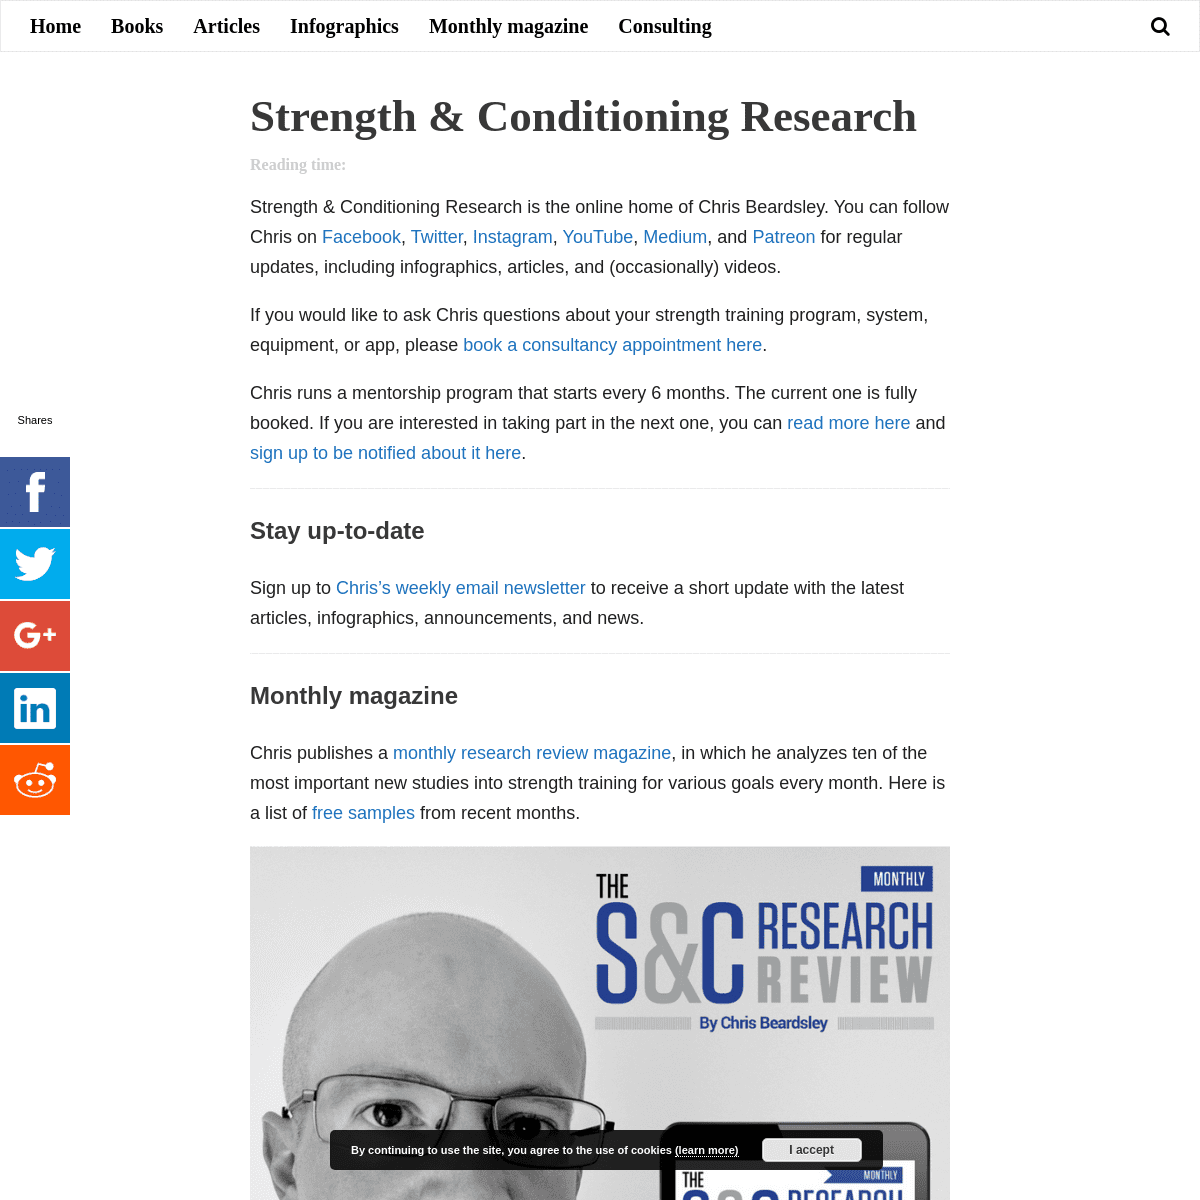 A complete backup of strengthandconditioningresearch.com